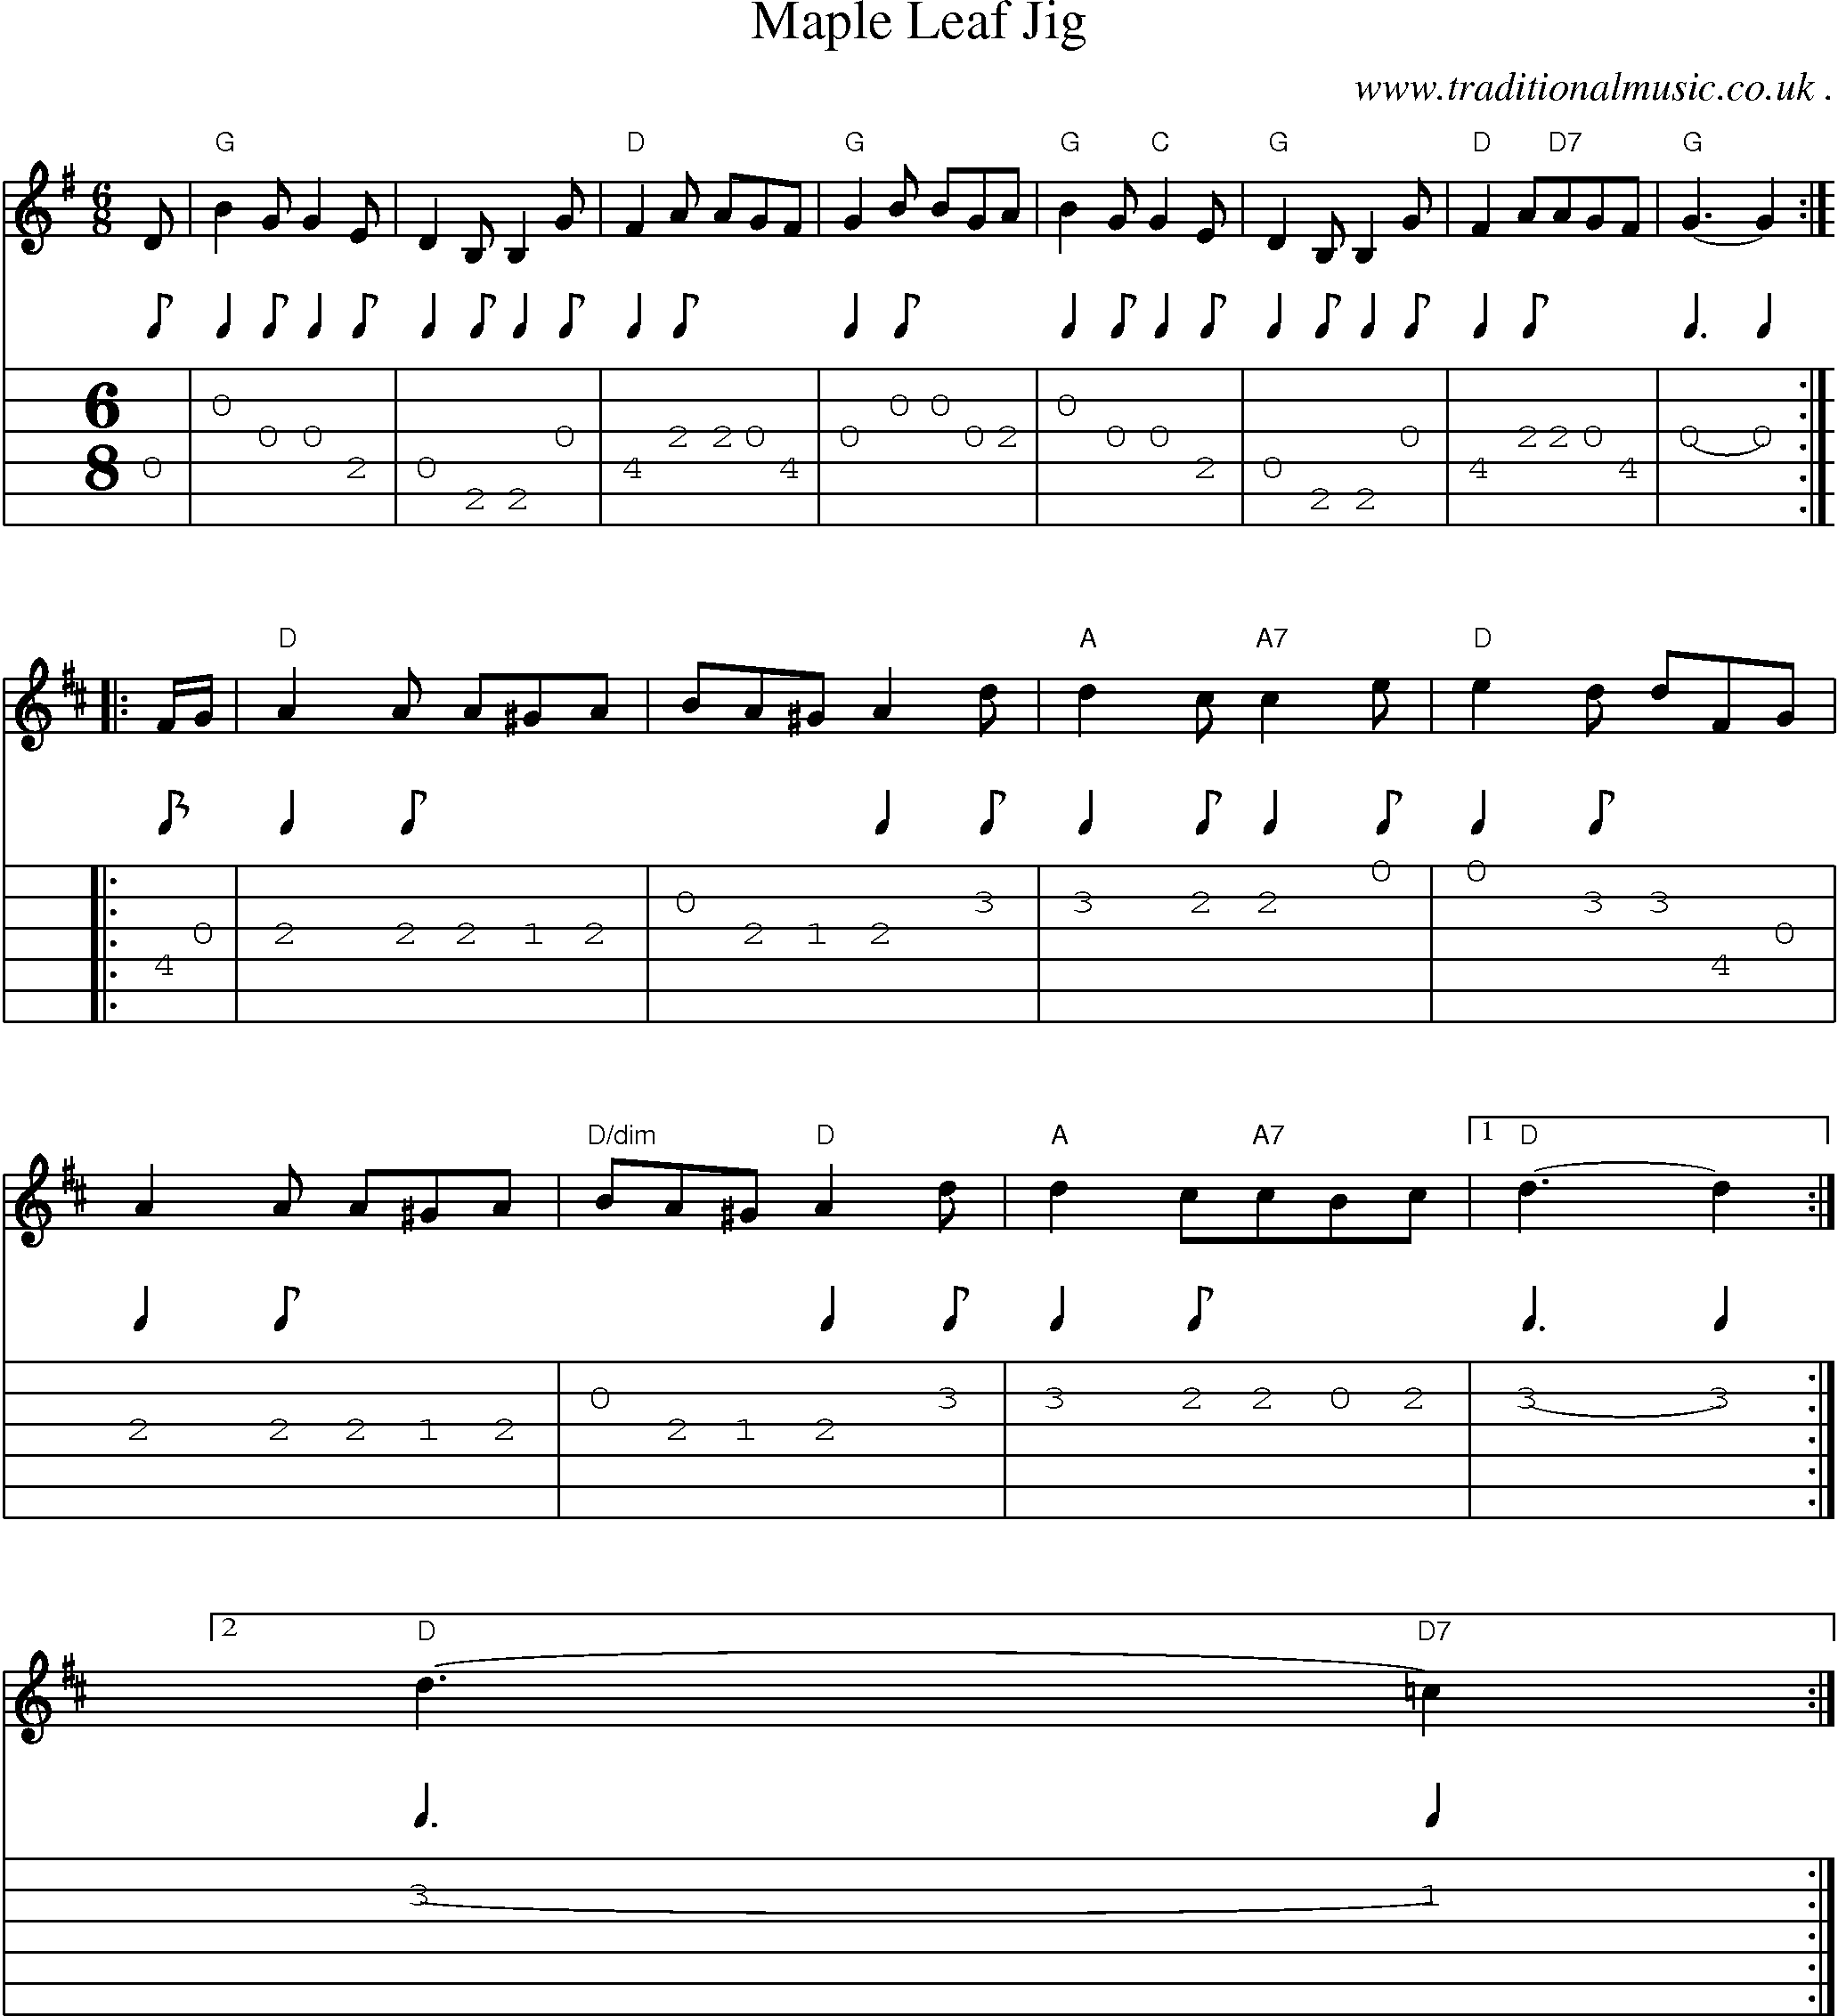 Sheet-Music and Guitar Tabs for Maple Leaf Jig